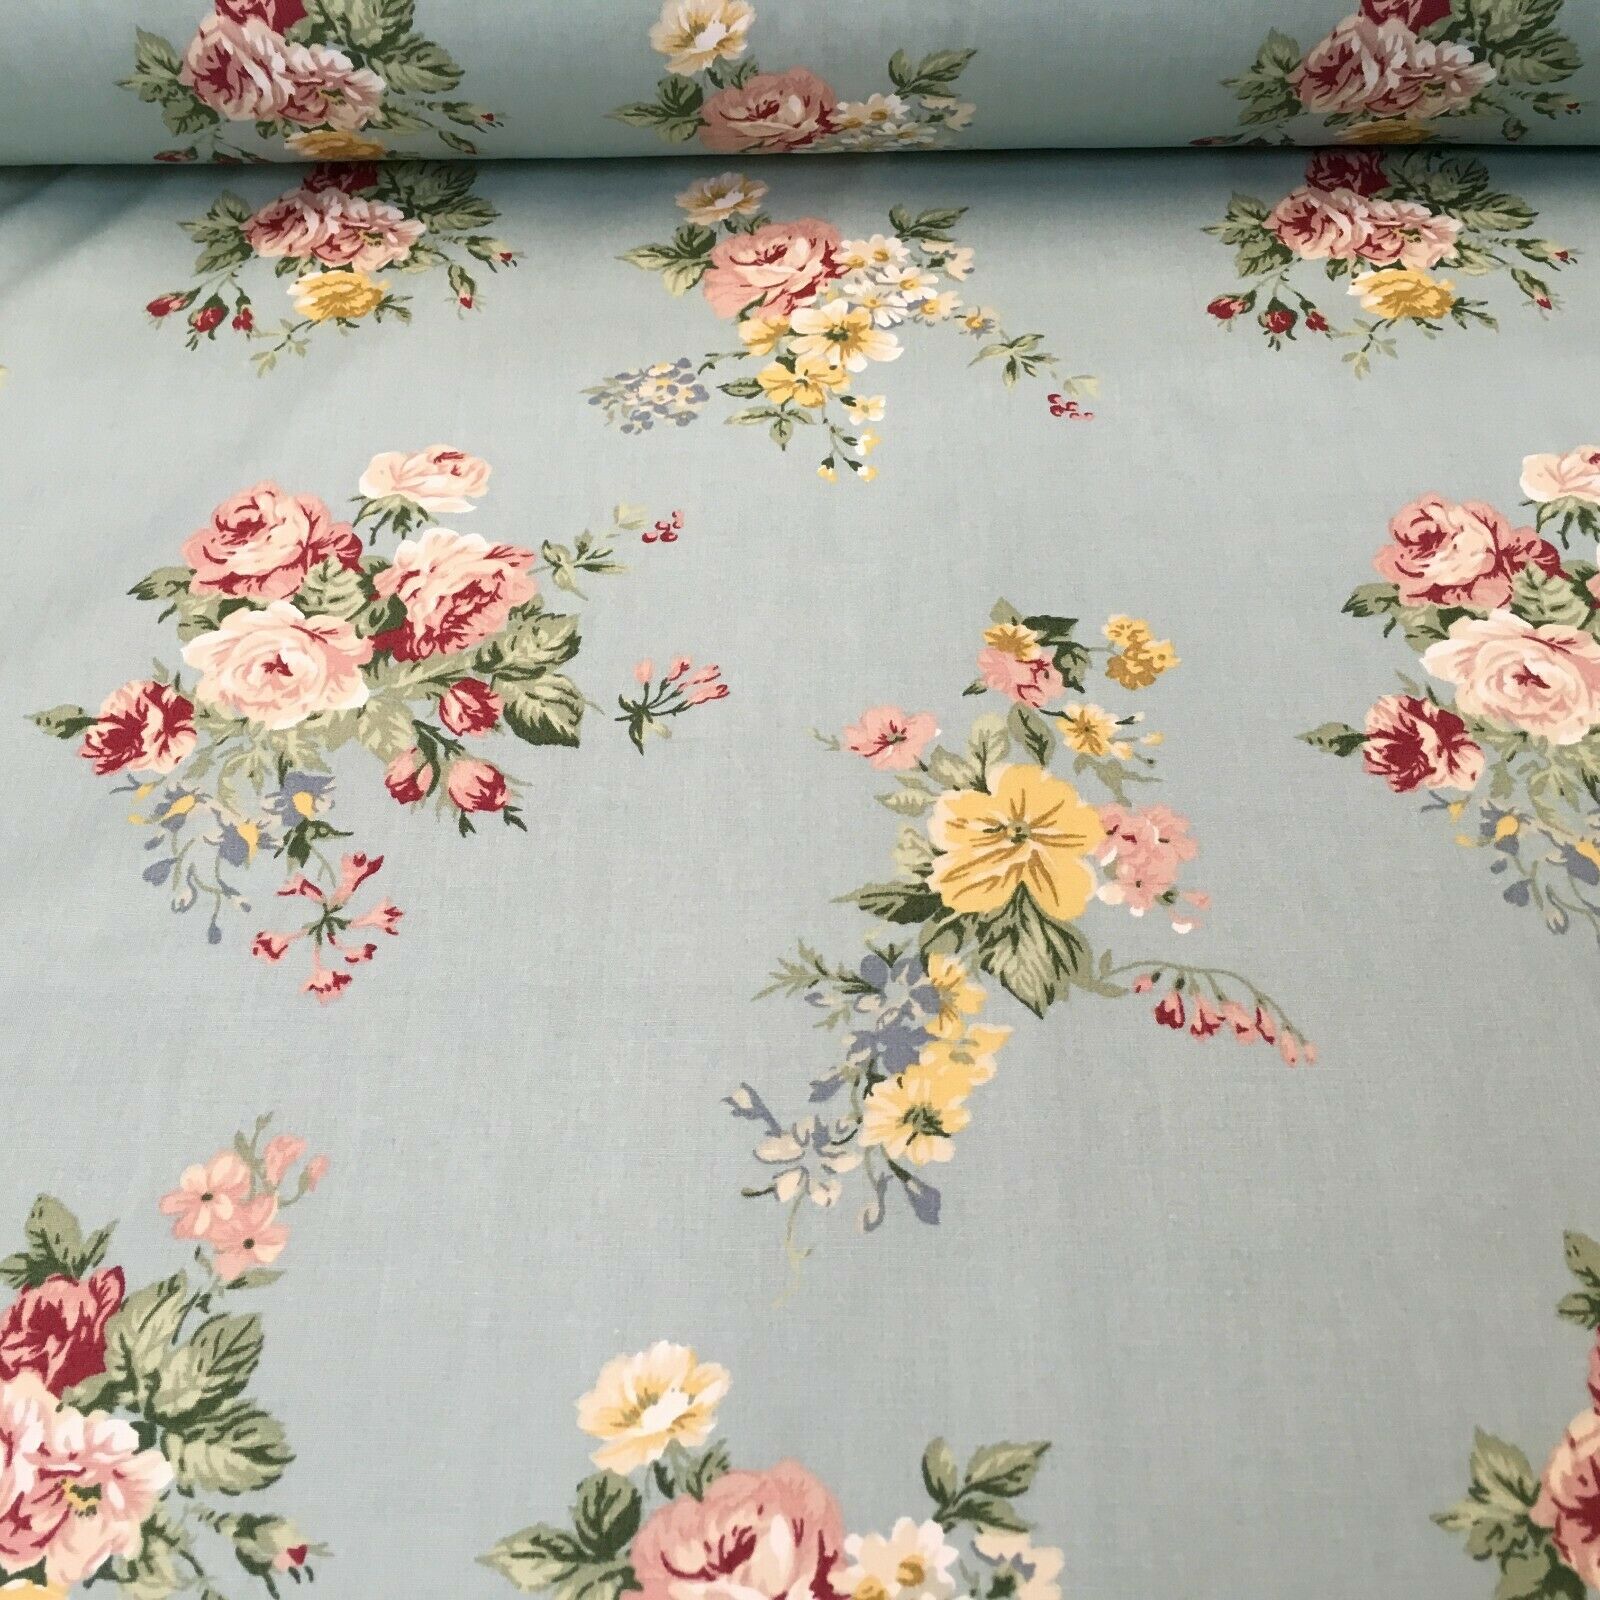 Floral Vintage Rose Shabby Chic Cotton Poplin Printed Fabric 110cm Wide MK1083